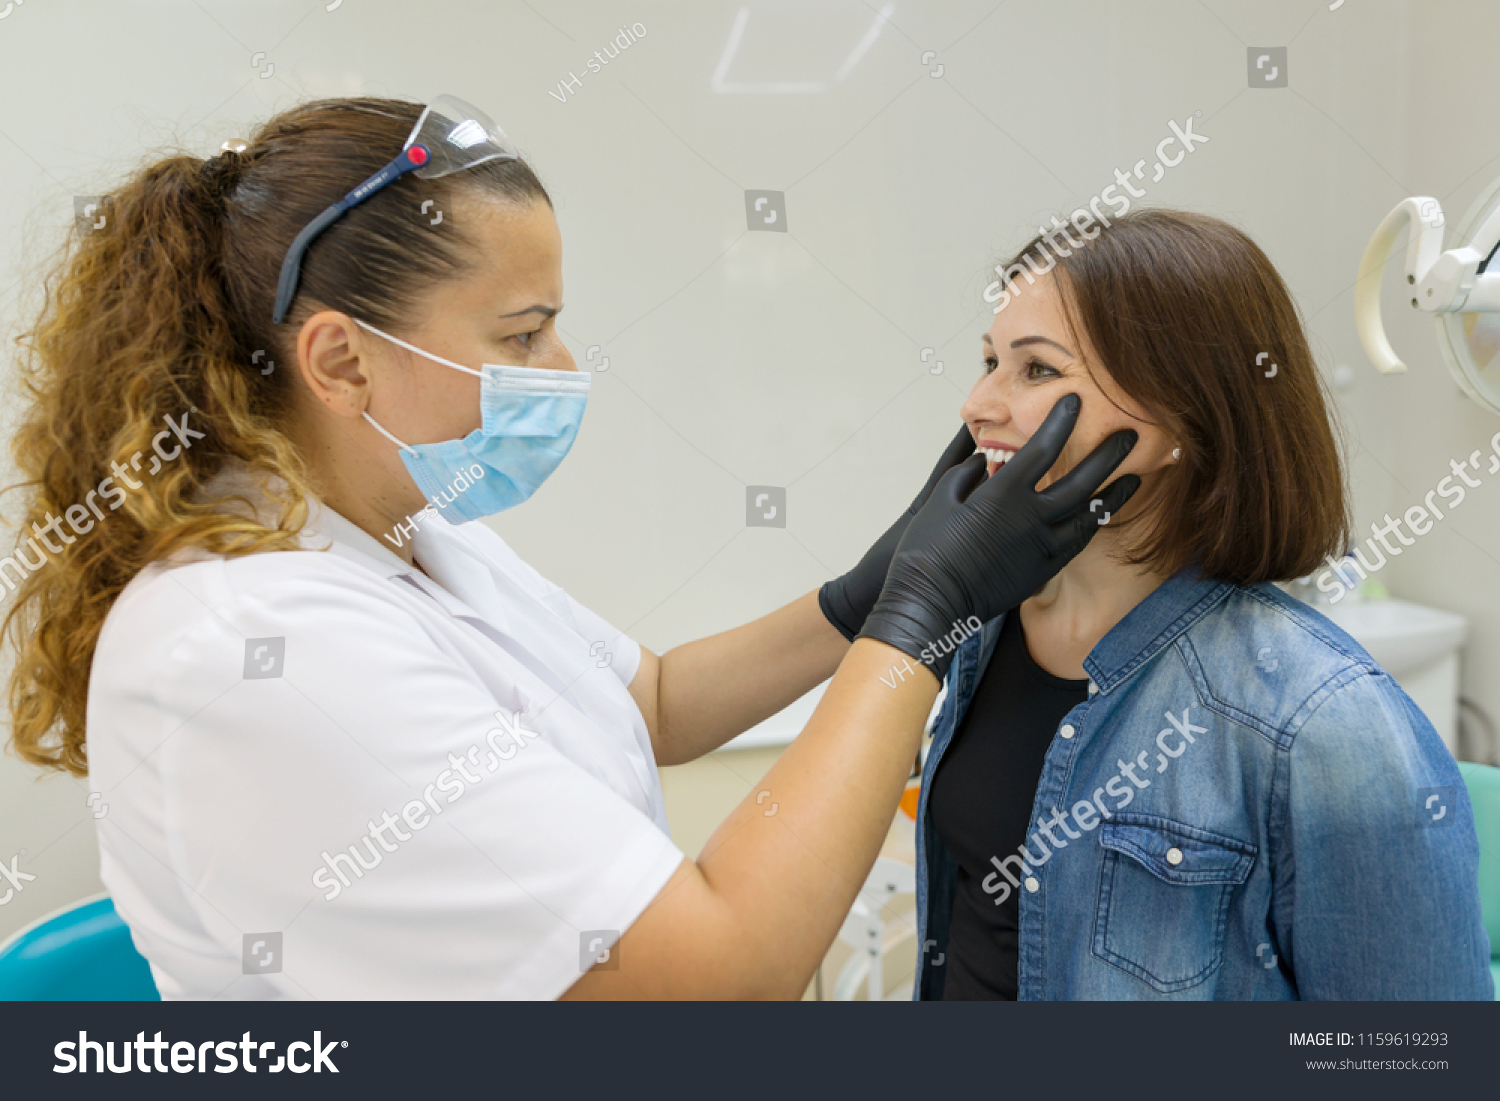 Adult woman suffering from toothache and complaining during visit to professional dentist #1159619293